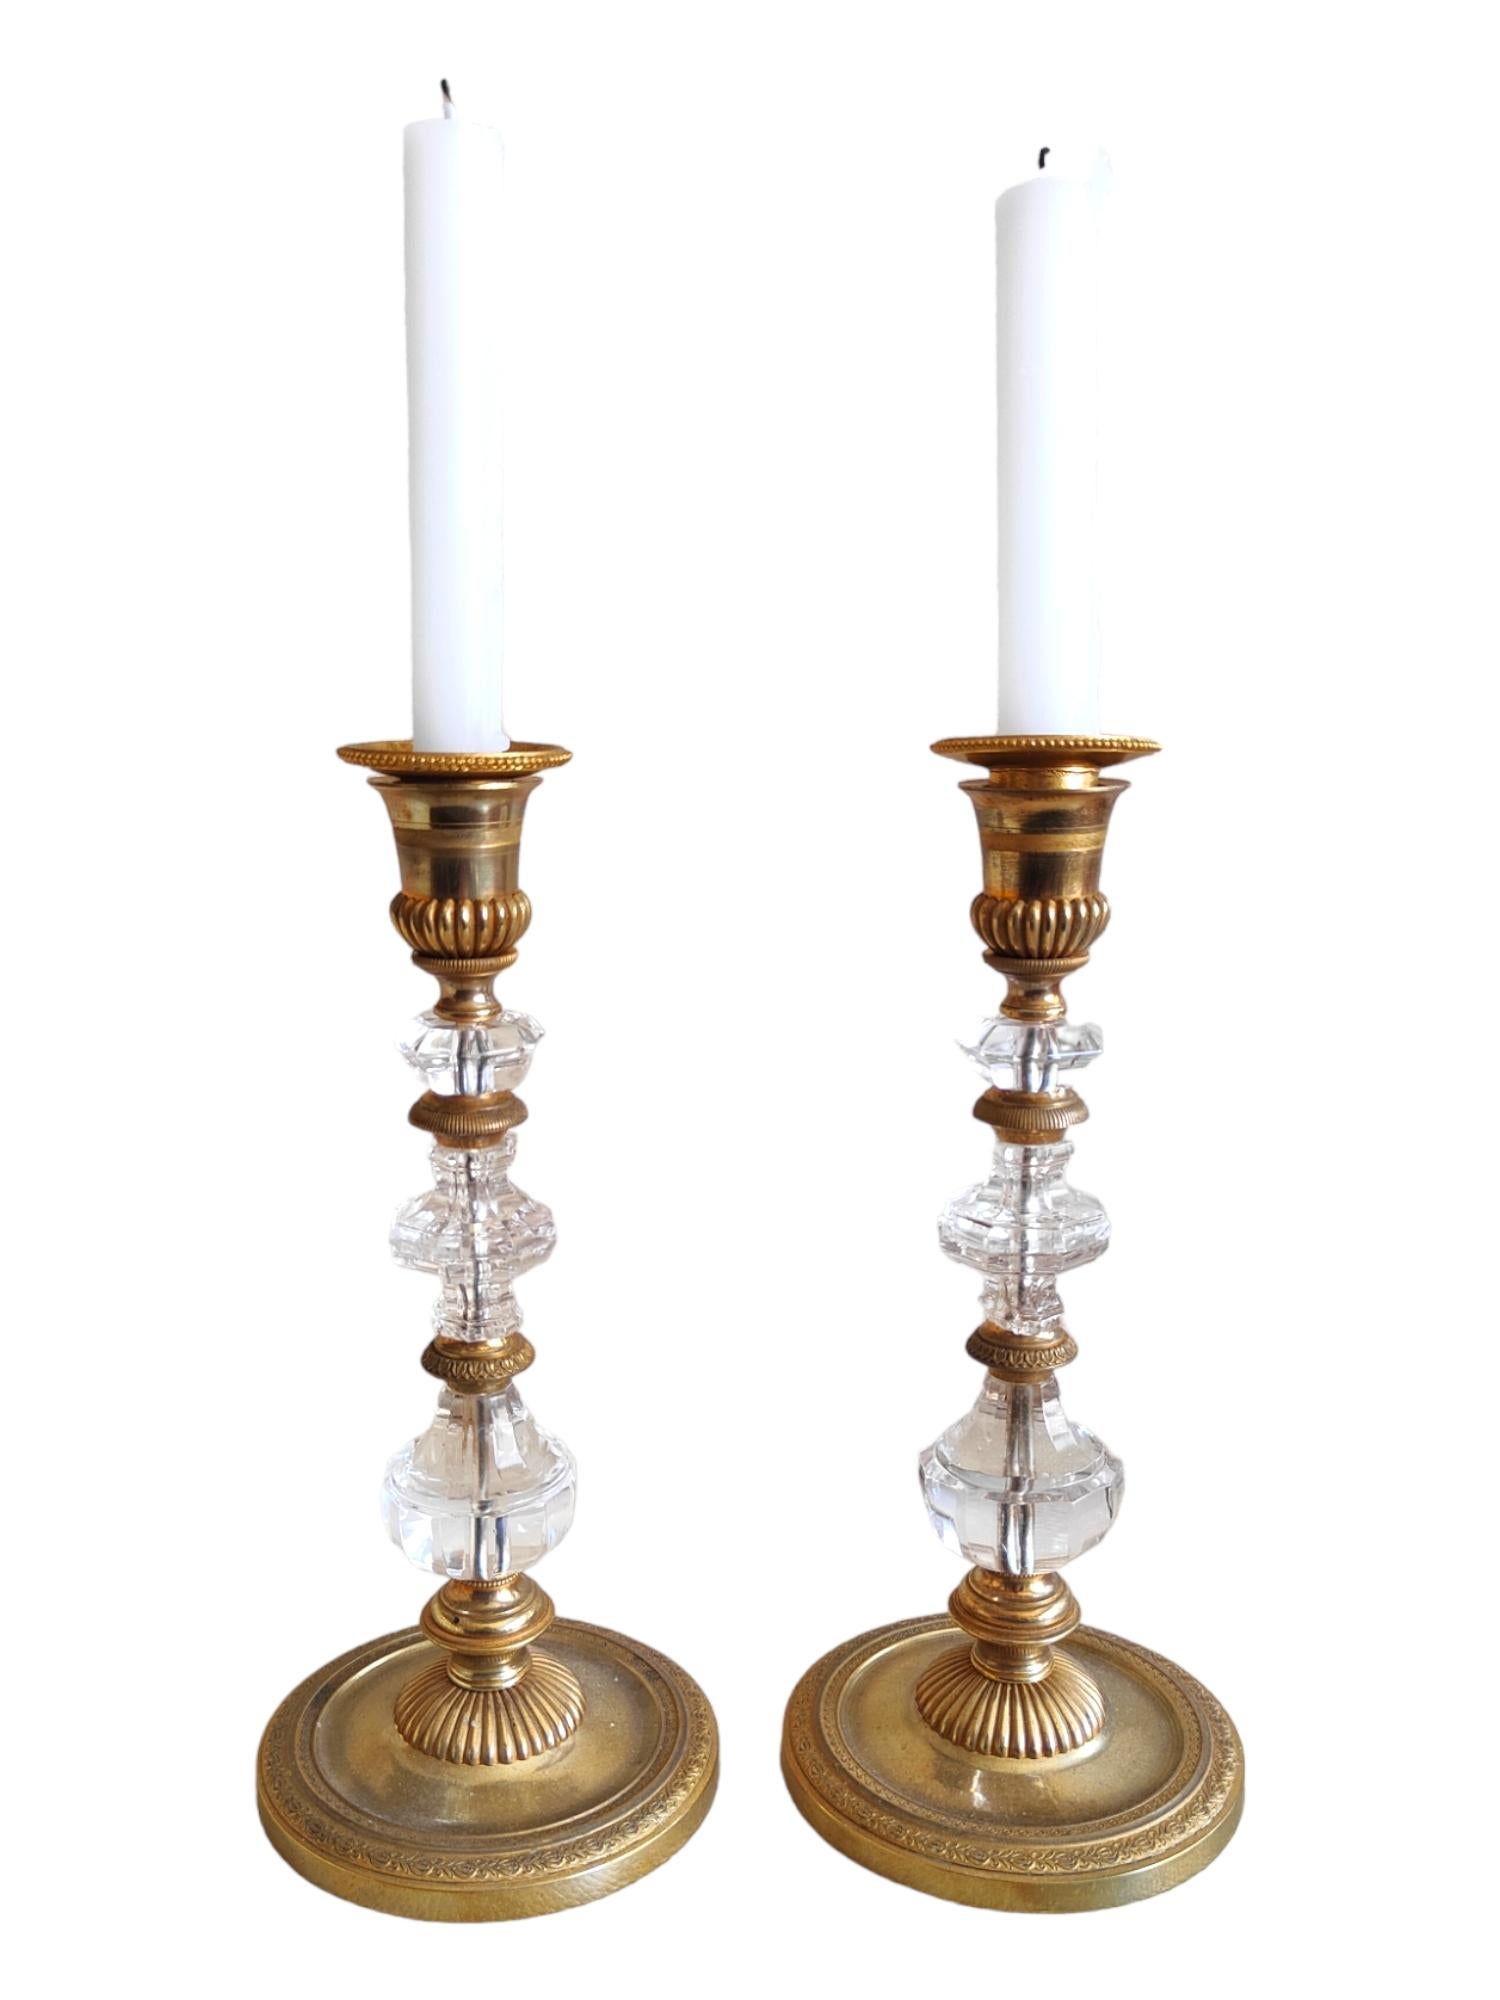 Pair of Quartz candlesticks (rock crystal, 19th century)
Candlesticks in very good condition, from the end of the 19th century, in gold bronze and rock crystal. Measurements: 27 cm.